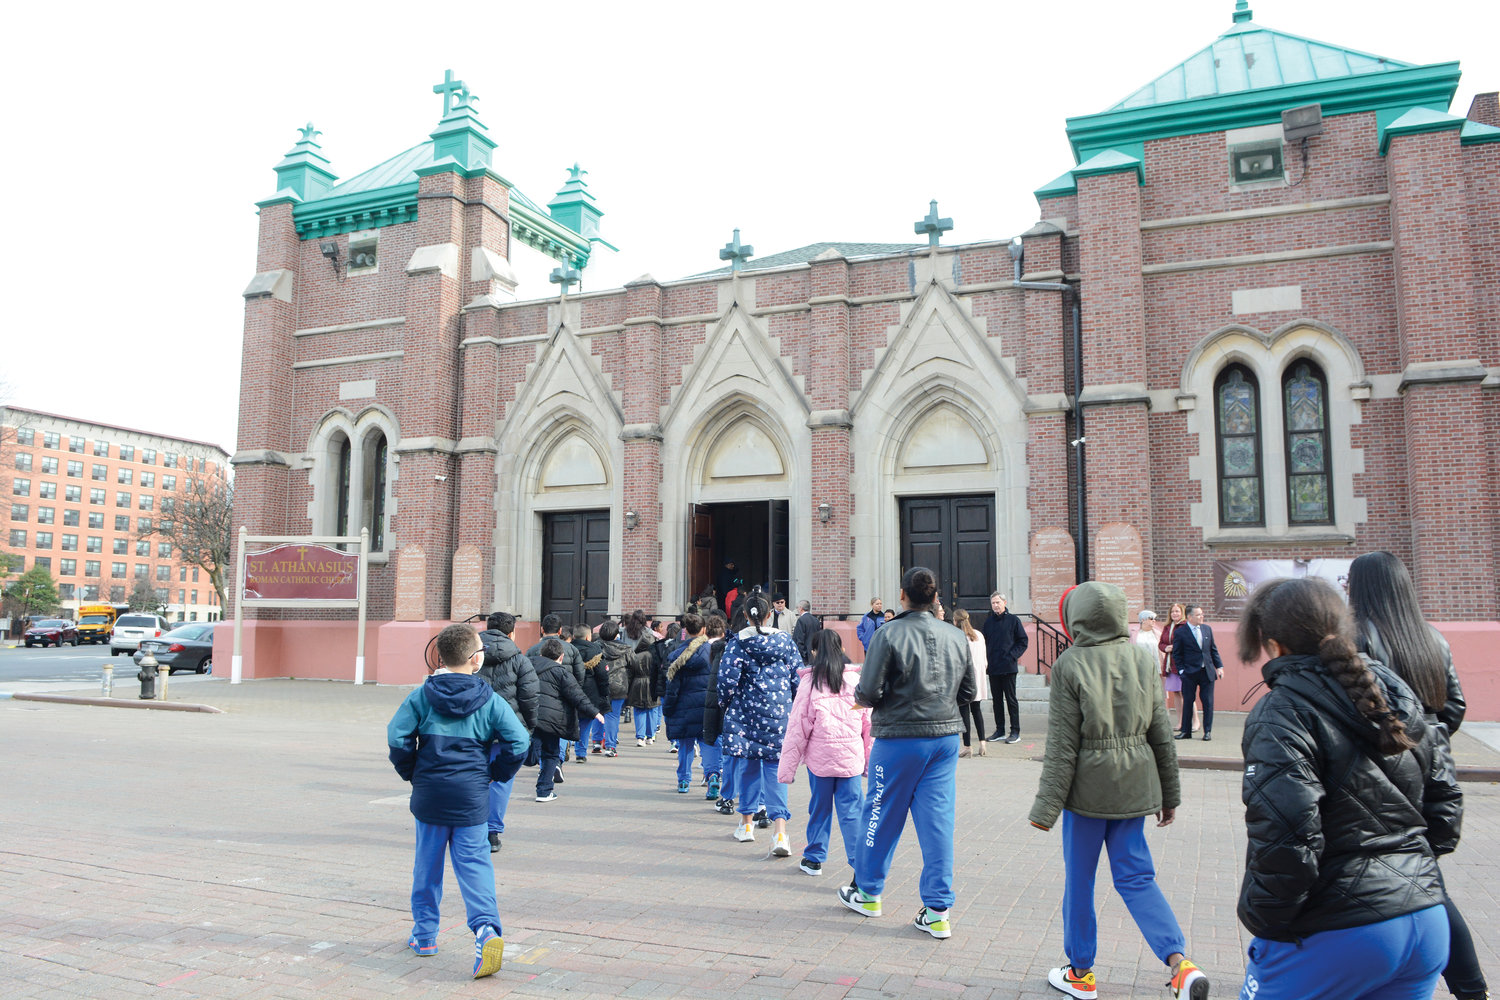 Students from St. Athanasius School, the Bronx, walk to nearby St. Athanasius Church where Cardinal Dolan offered morning Mass for them March 23 before touring the school.